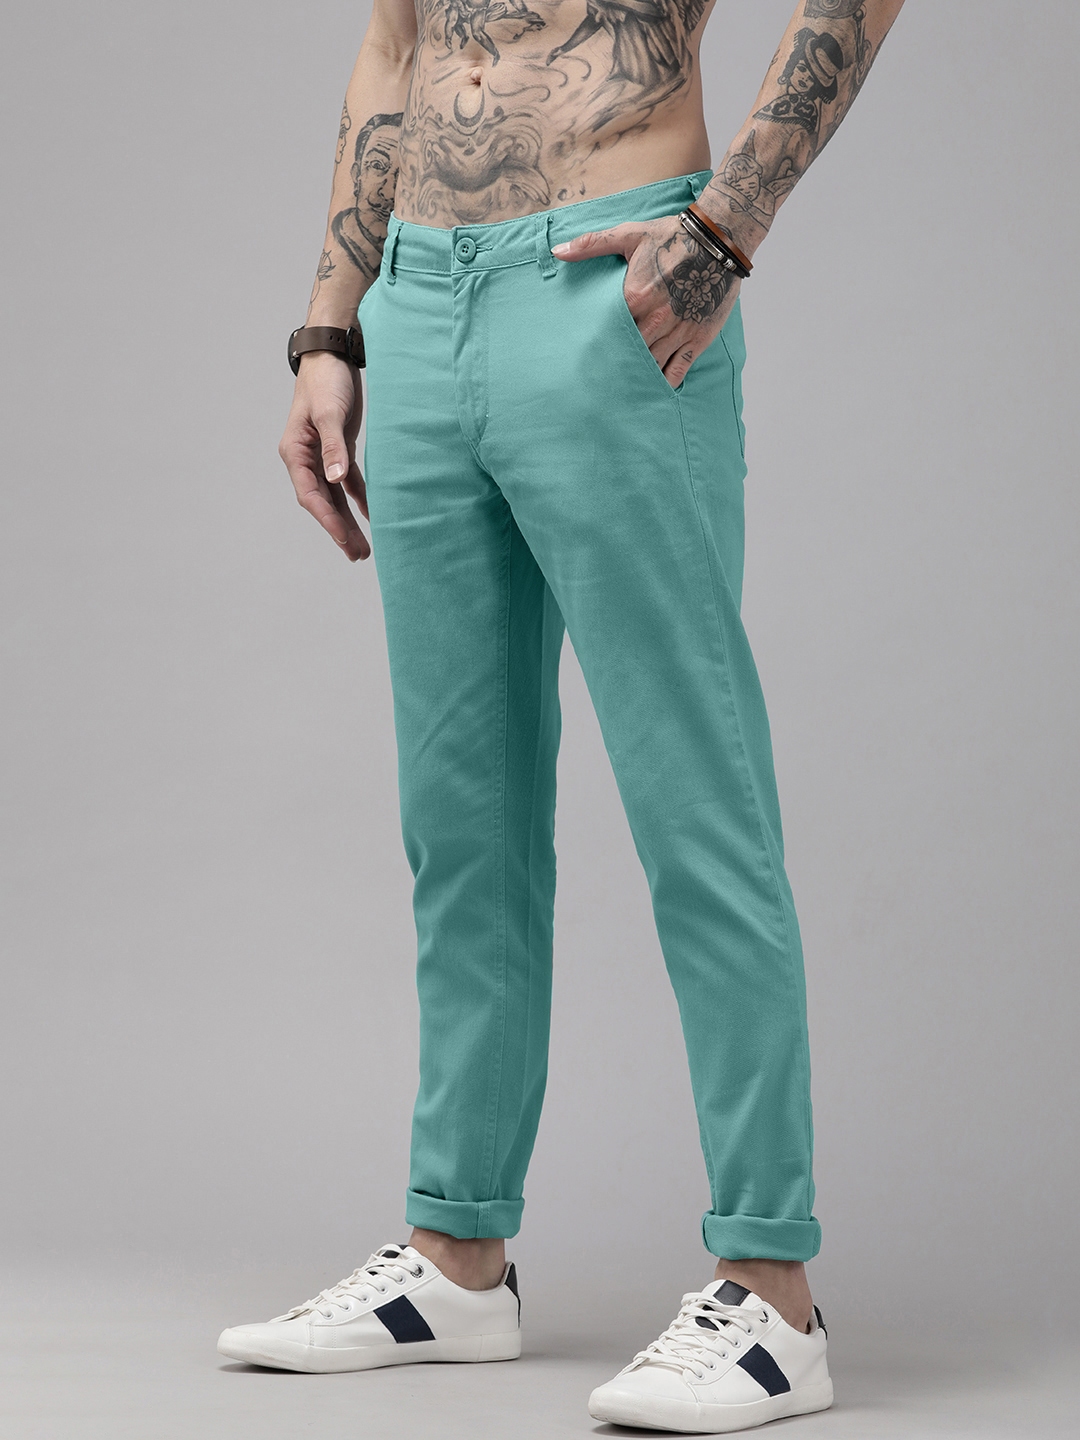 Buy Roadster Men Turquoise Blue Slim Fit Chinos Trousers - Trousers for ...